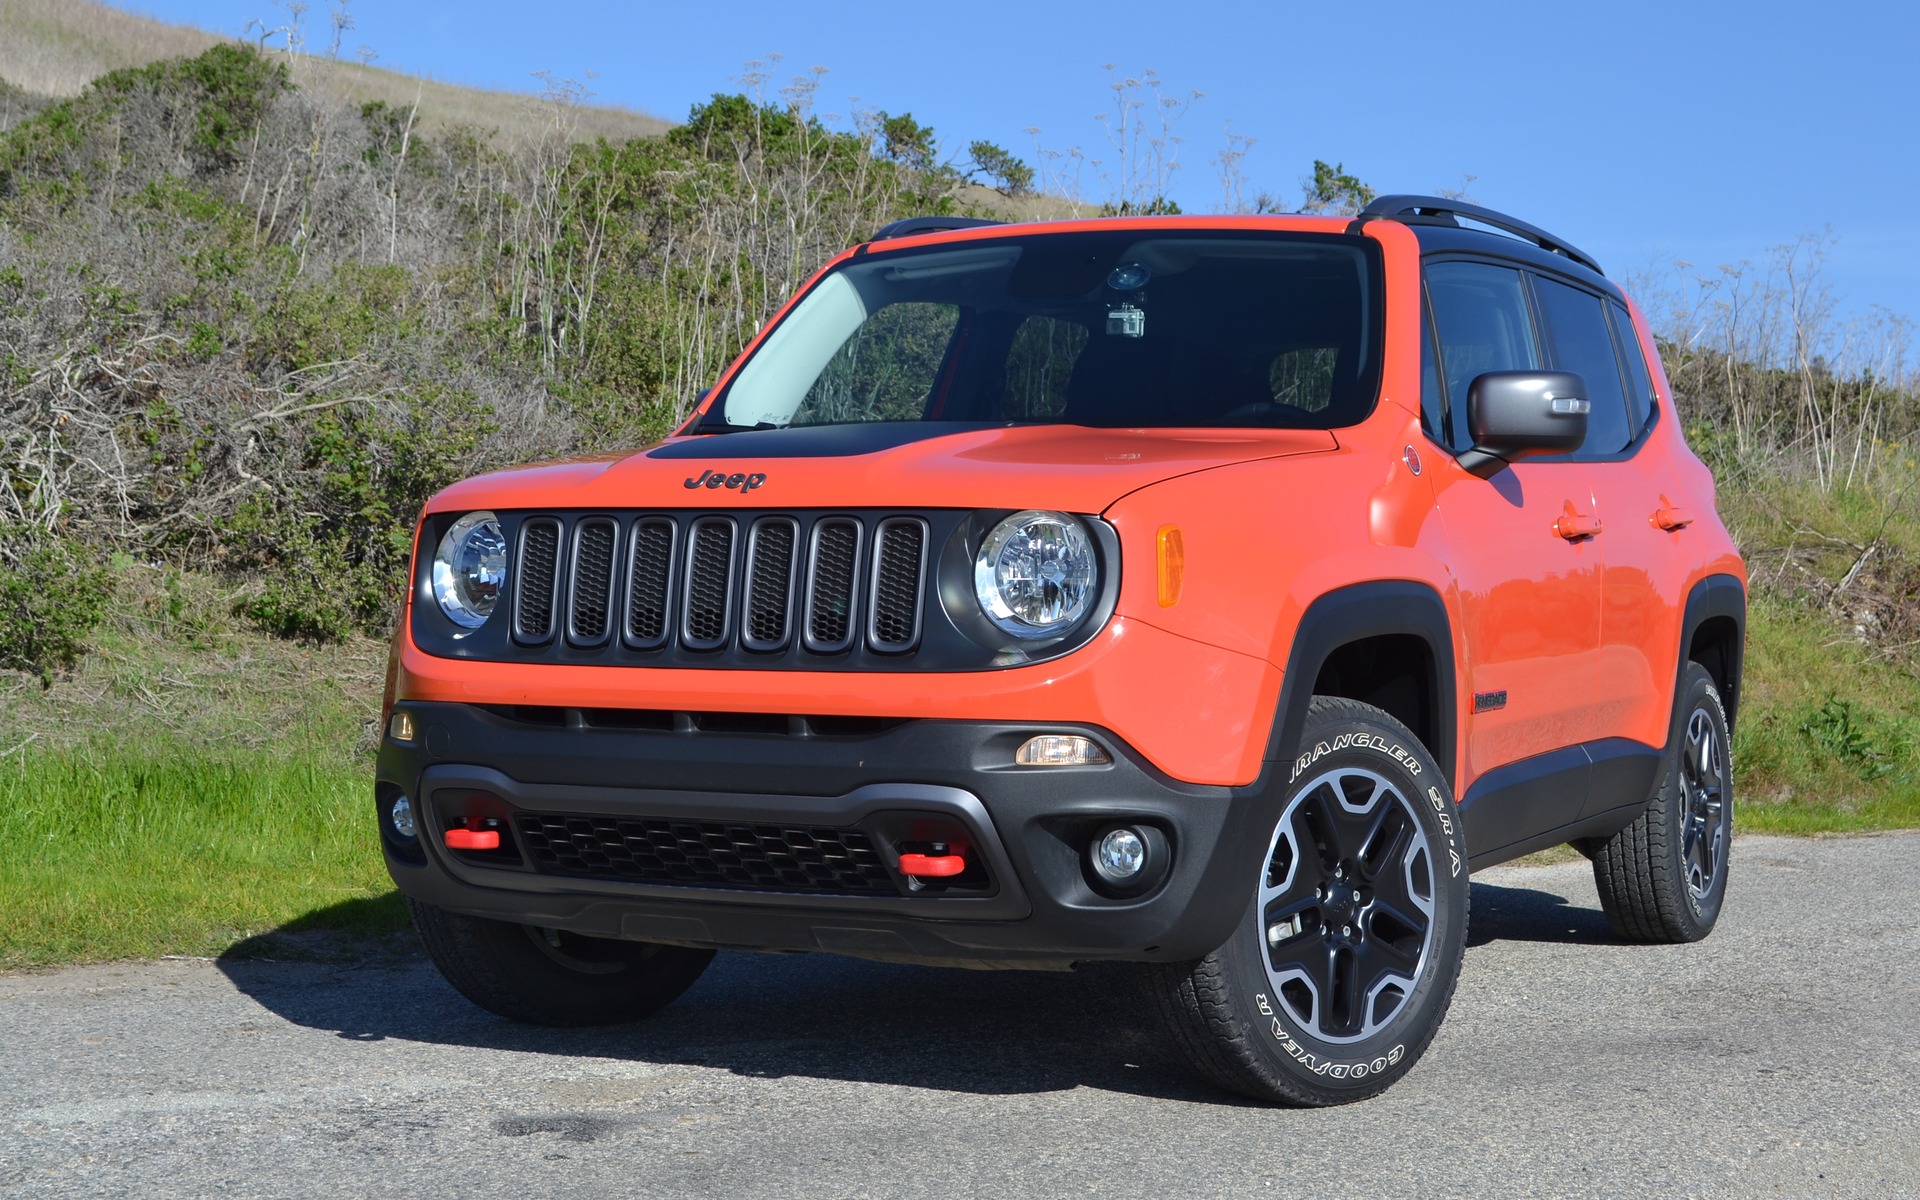 2015 Jeep Renegade: Small, But Still A Jeep - The Car Guide